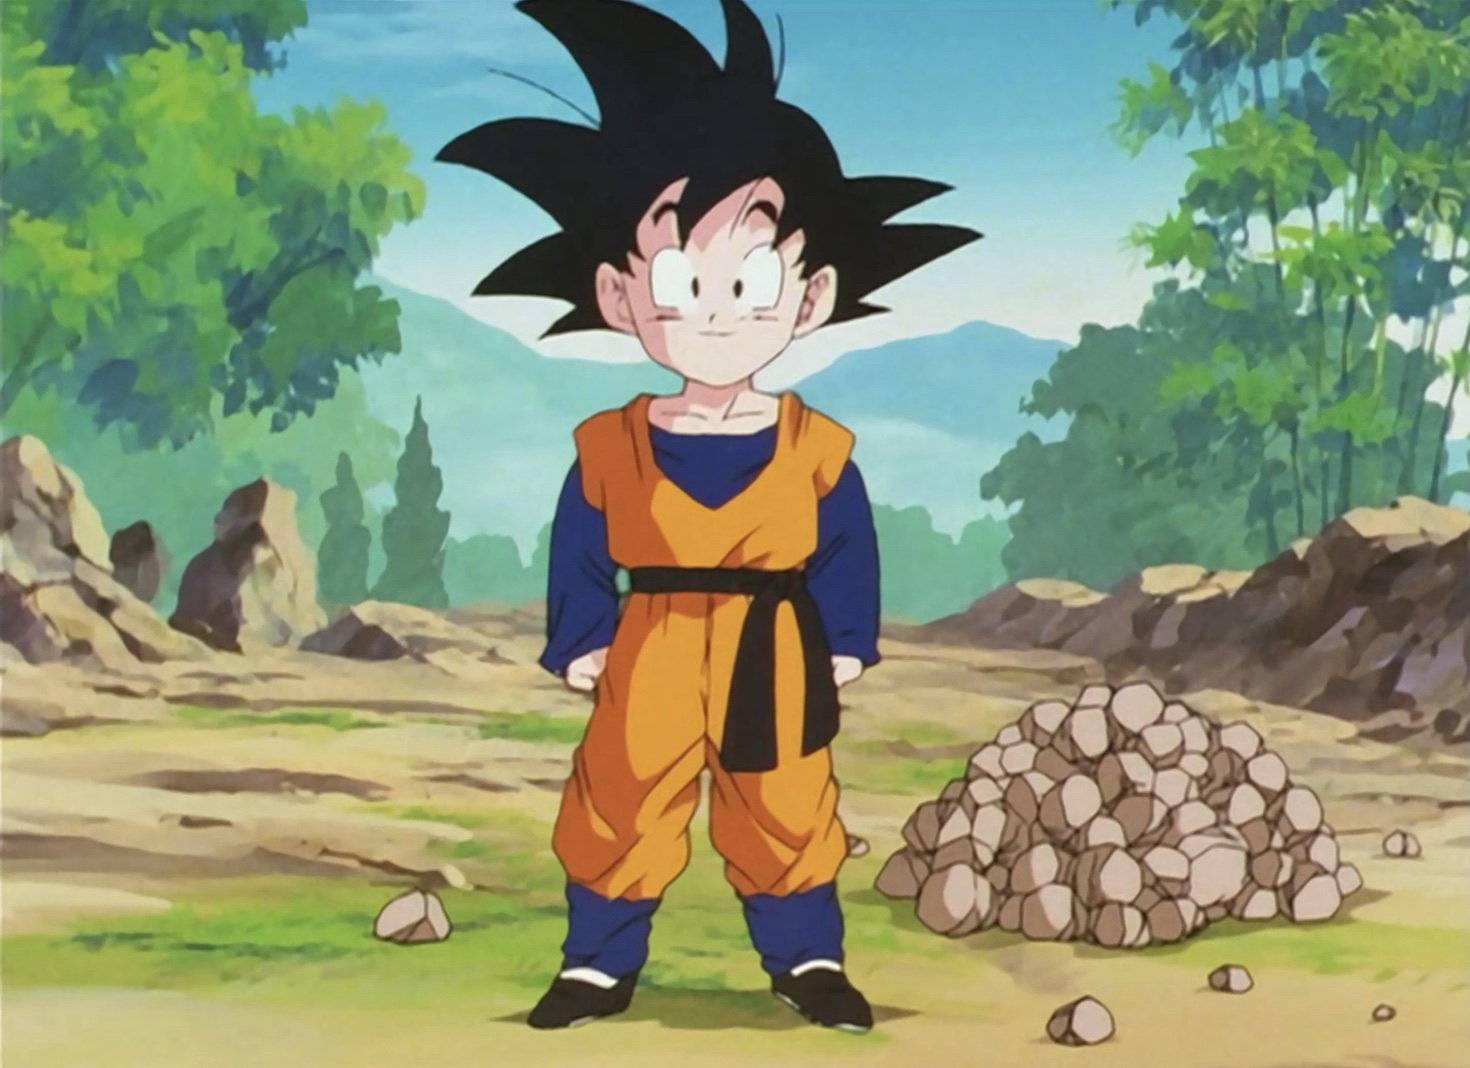 You missed a prime opportunity to have a picture of kid Goku because seriou...